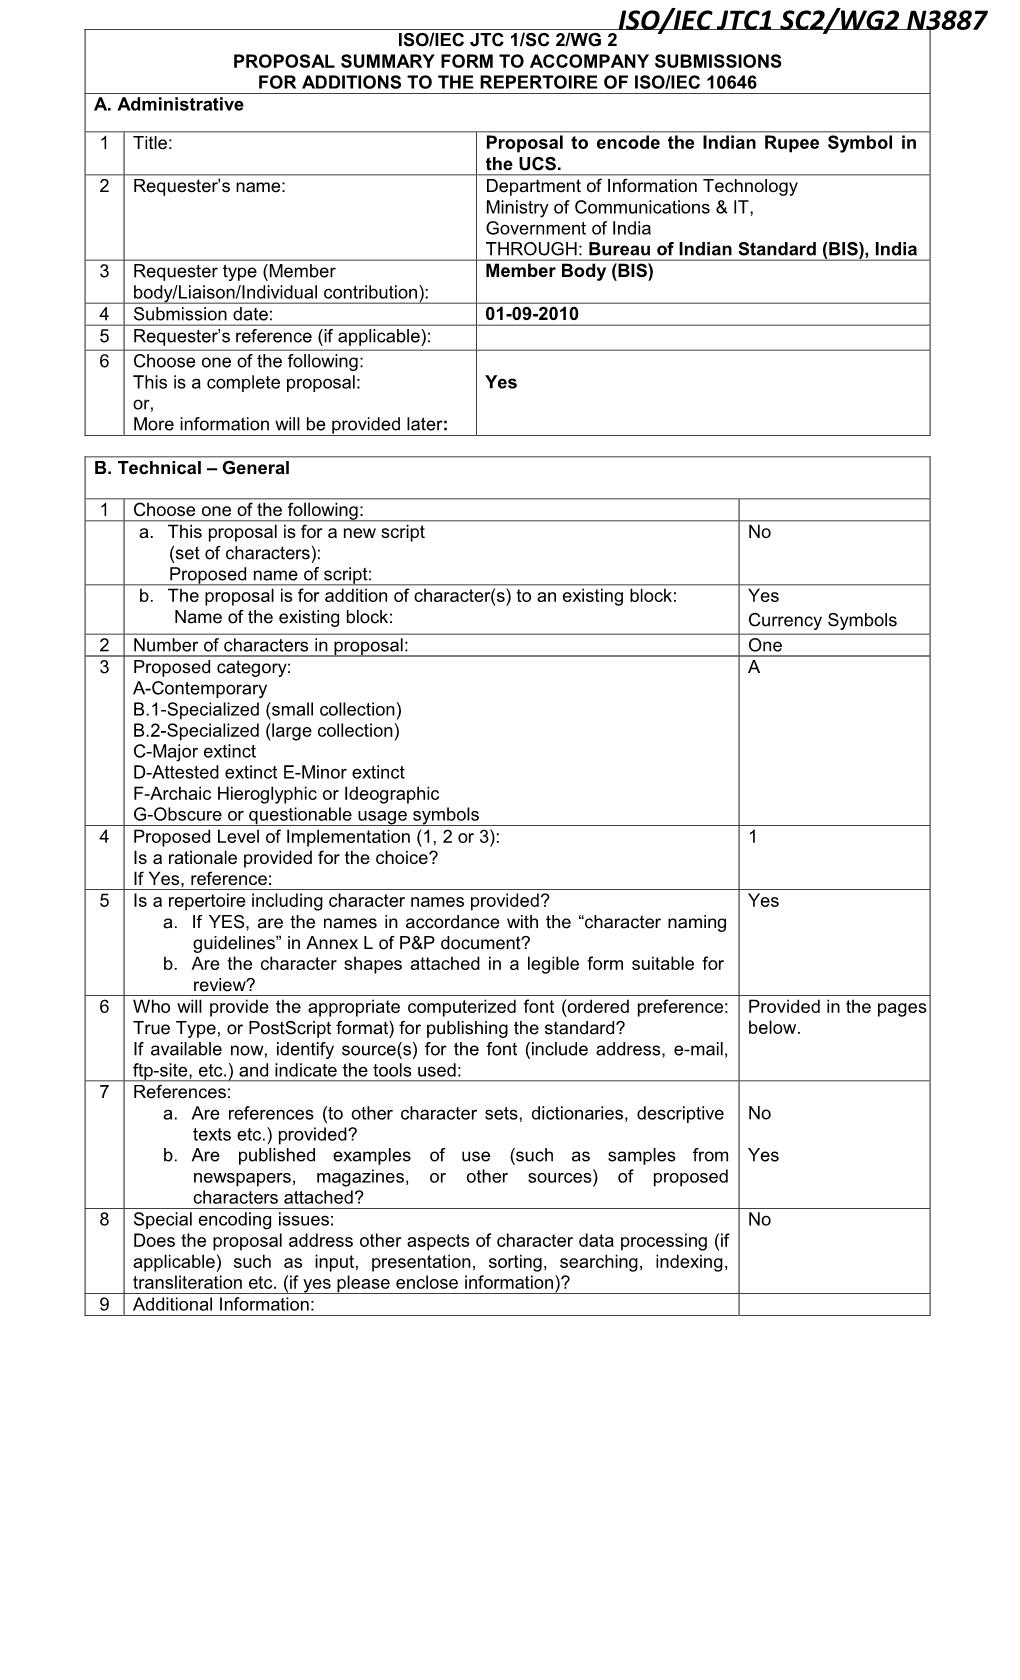 Wg2 N3887 Iso/Iec Jtc 1/Sc 2/Wg 2 Proposal Summary Form to Accompany Submissions for Additions to the Repertoire of Iso/Iec 10646 A